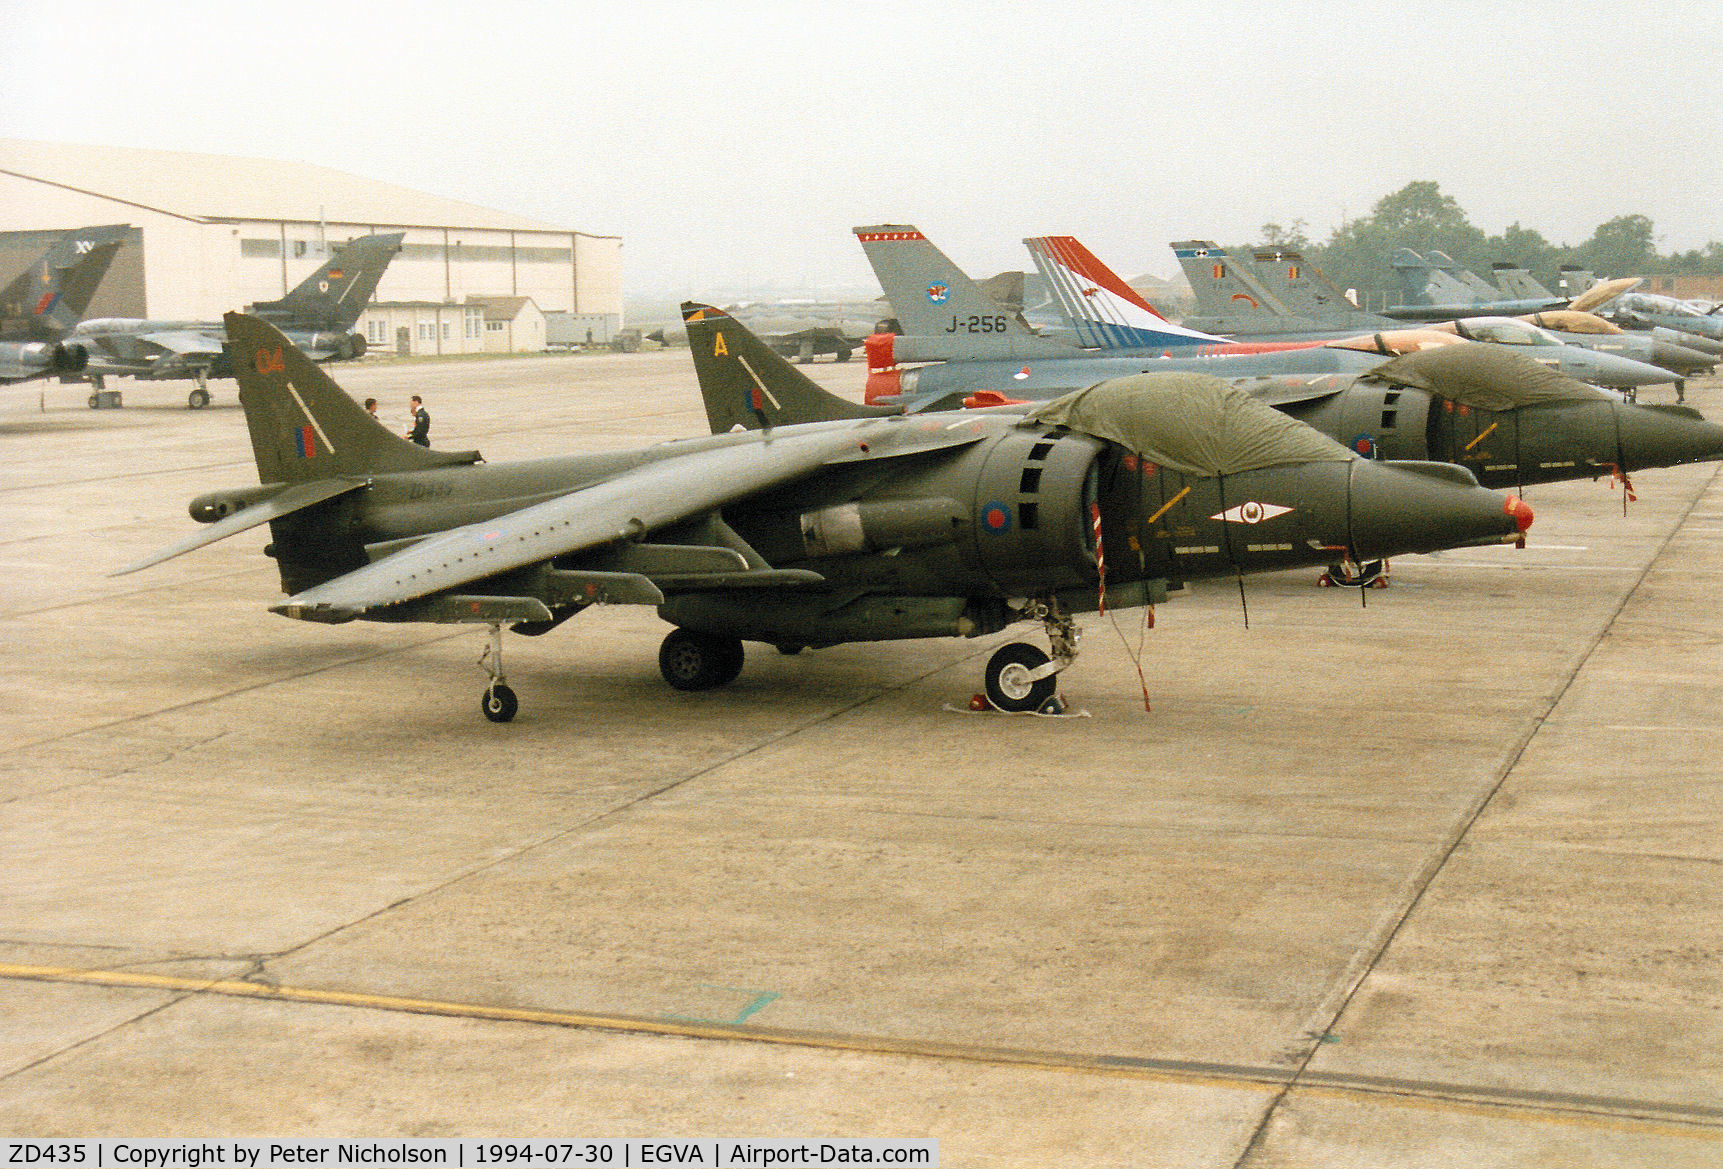 ZD435, 1989 British Aerospace Harrier GR.7 C/N P47, Harrier GR.7, callsign Wildcat 1, of 1 Squadron at RAF Wittering on the flight-line at the 1994 Intnl Air Tattoo at RAF Fairford.